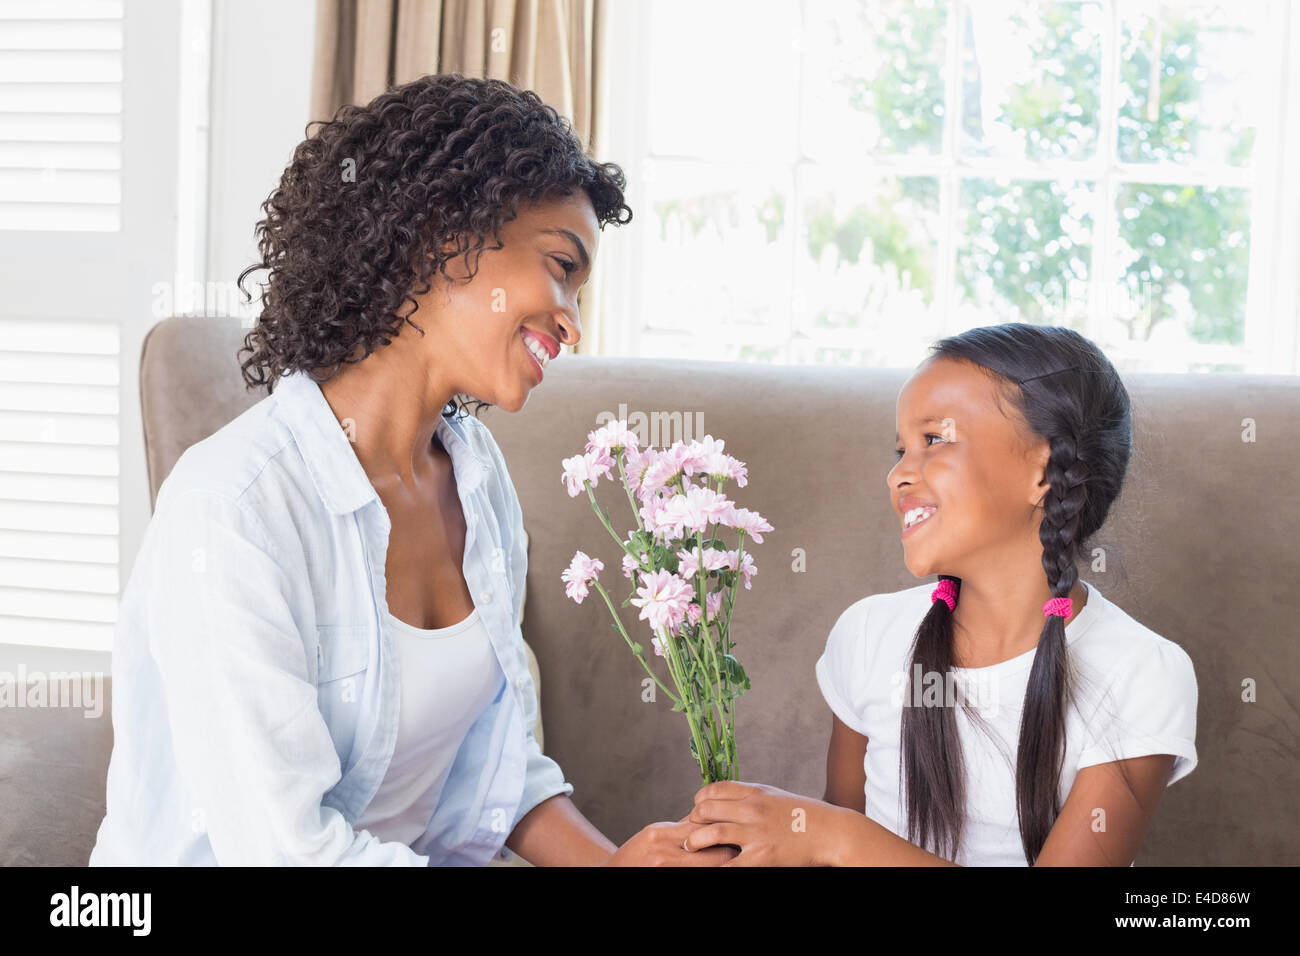 Pretty mother sitting on the couch with her daughter offering flowers Stock Photo